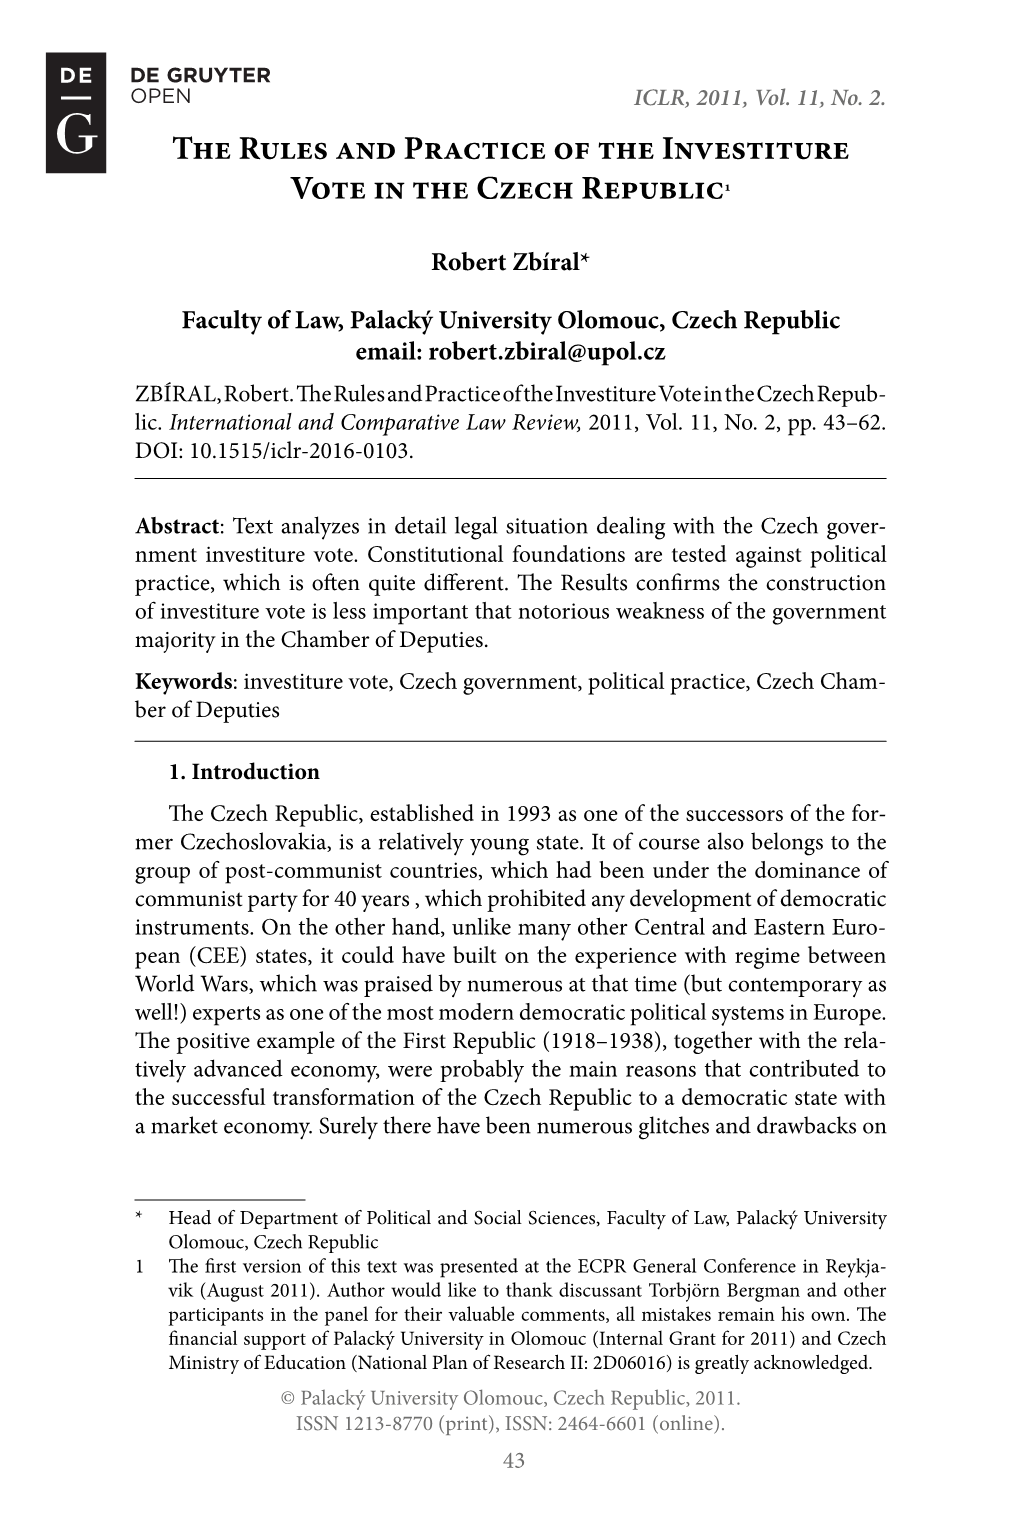 The Rules and Practice of the Investiture Vote in the Czech Republic1